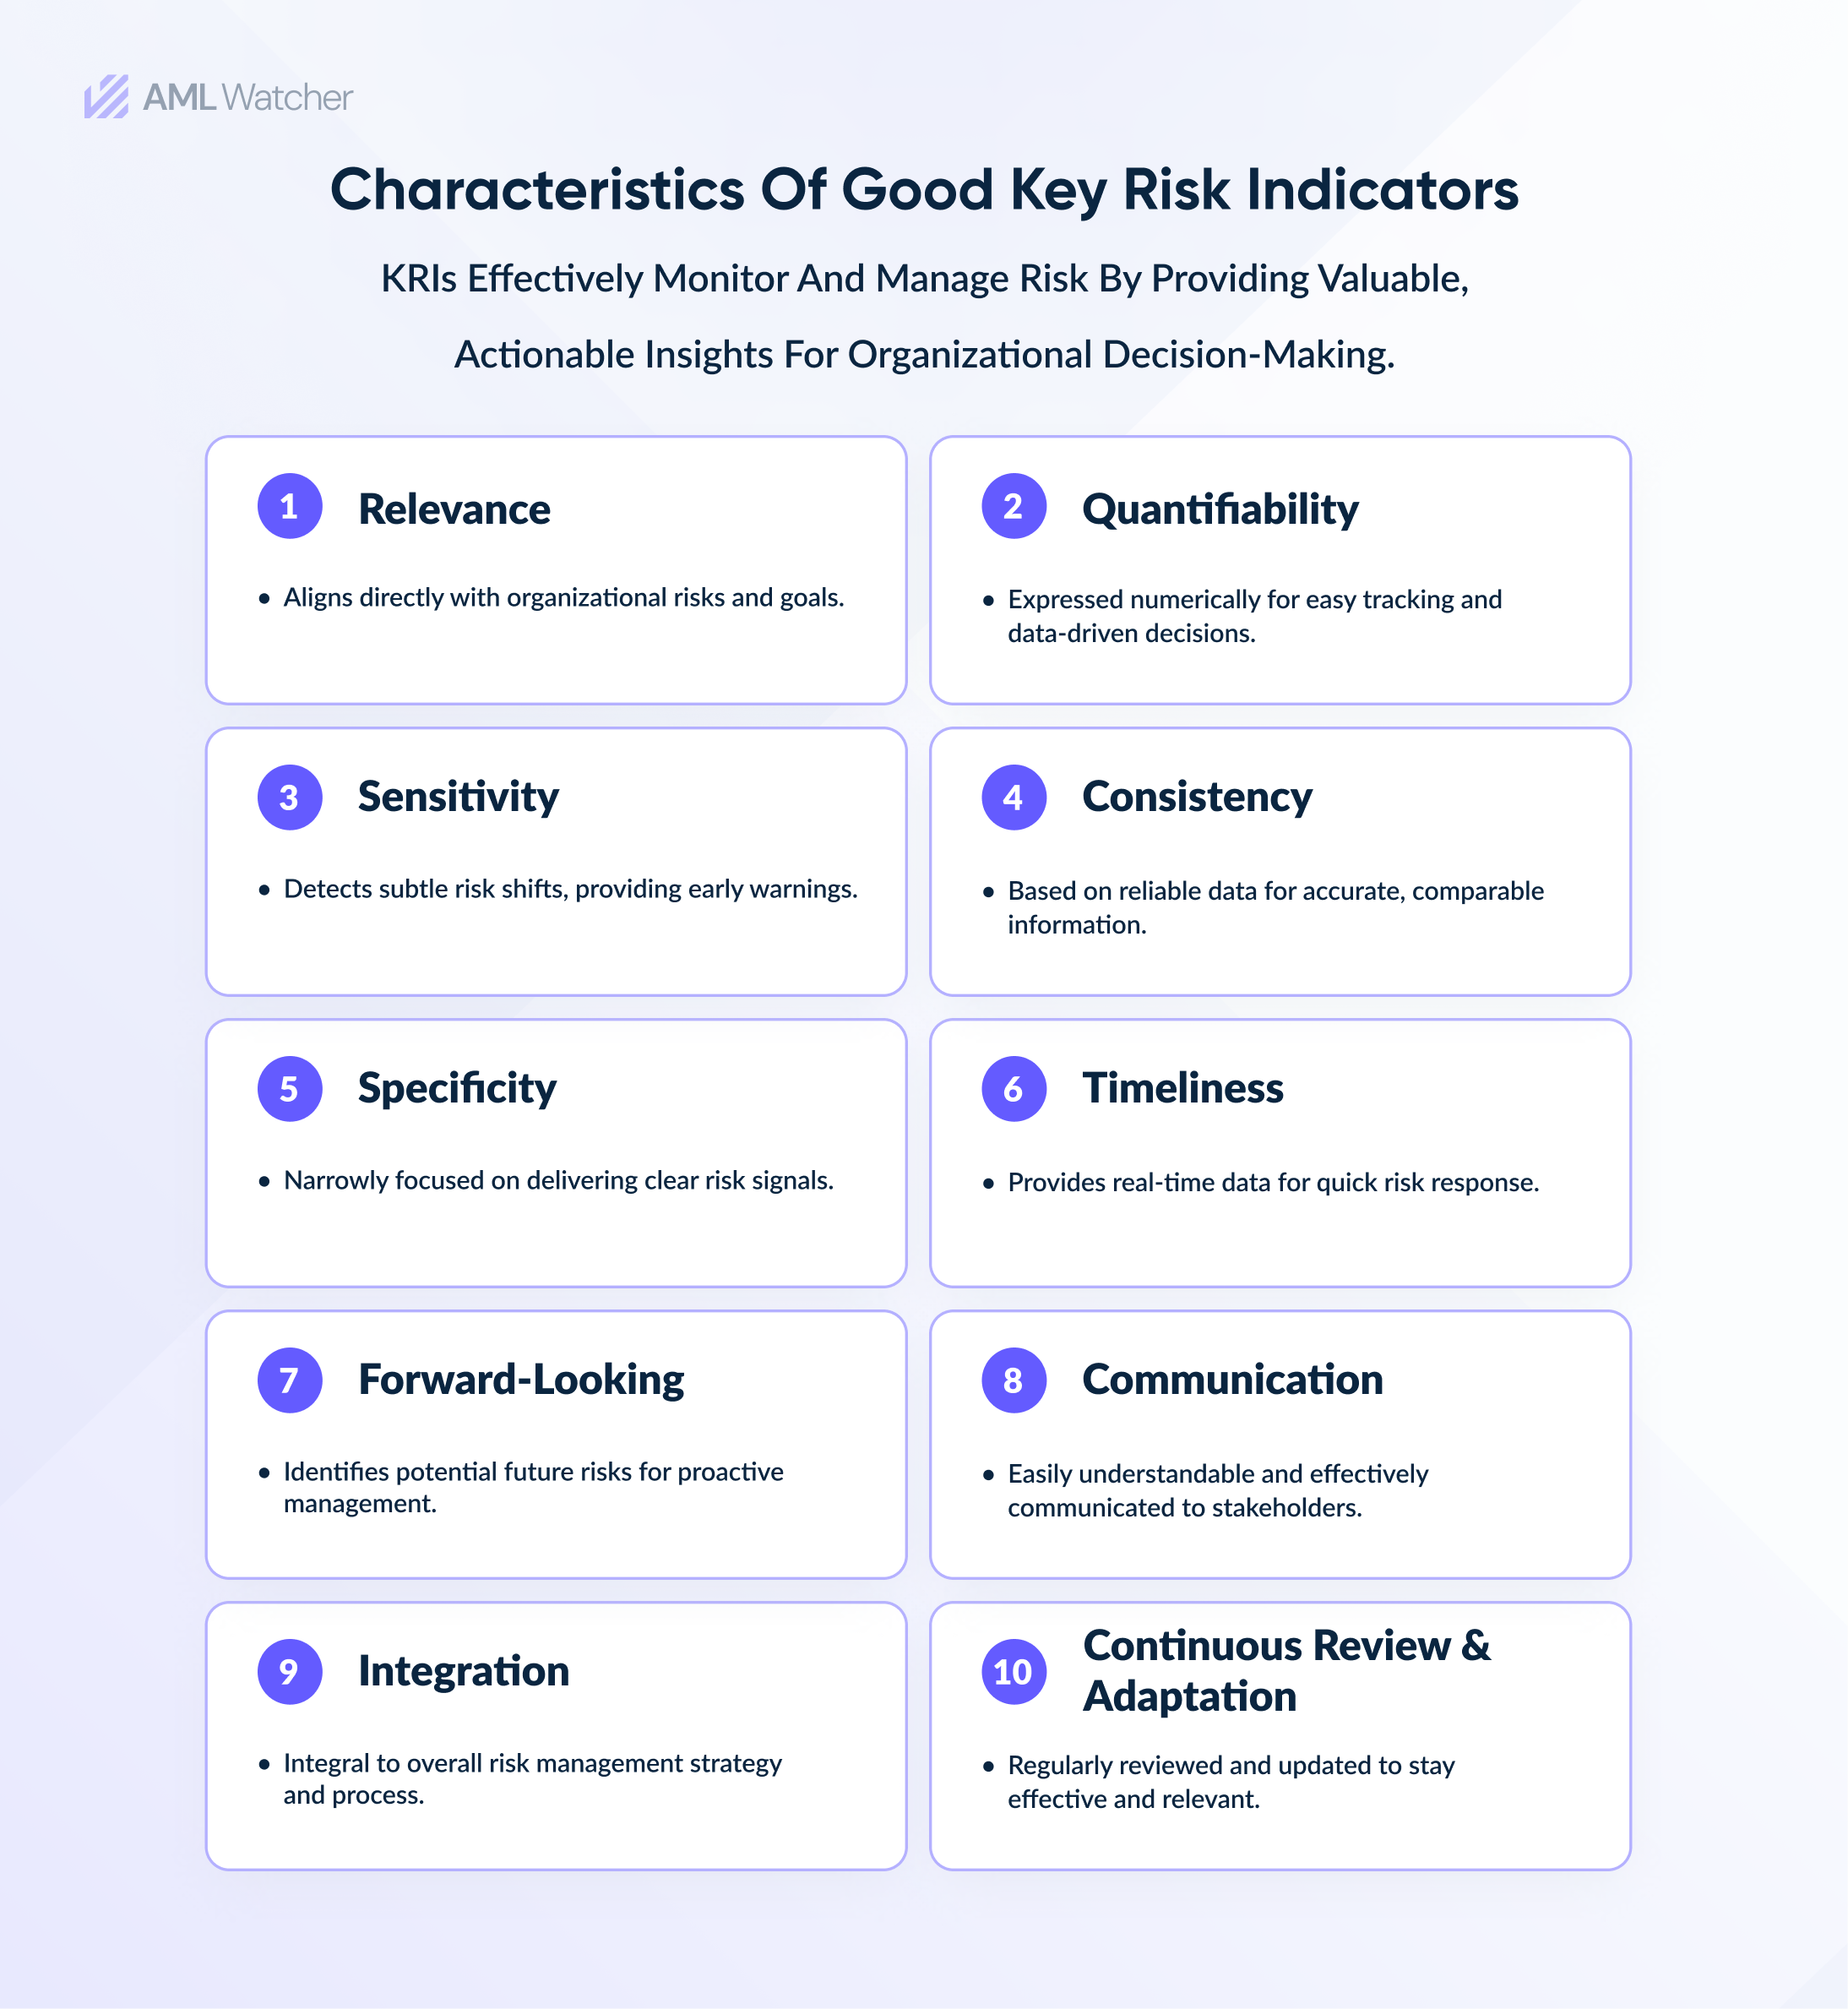 This image shows the significant characteristics of Good Key Risk Indicators.